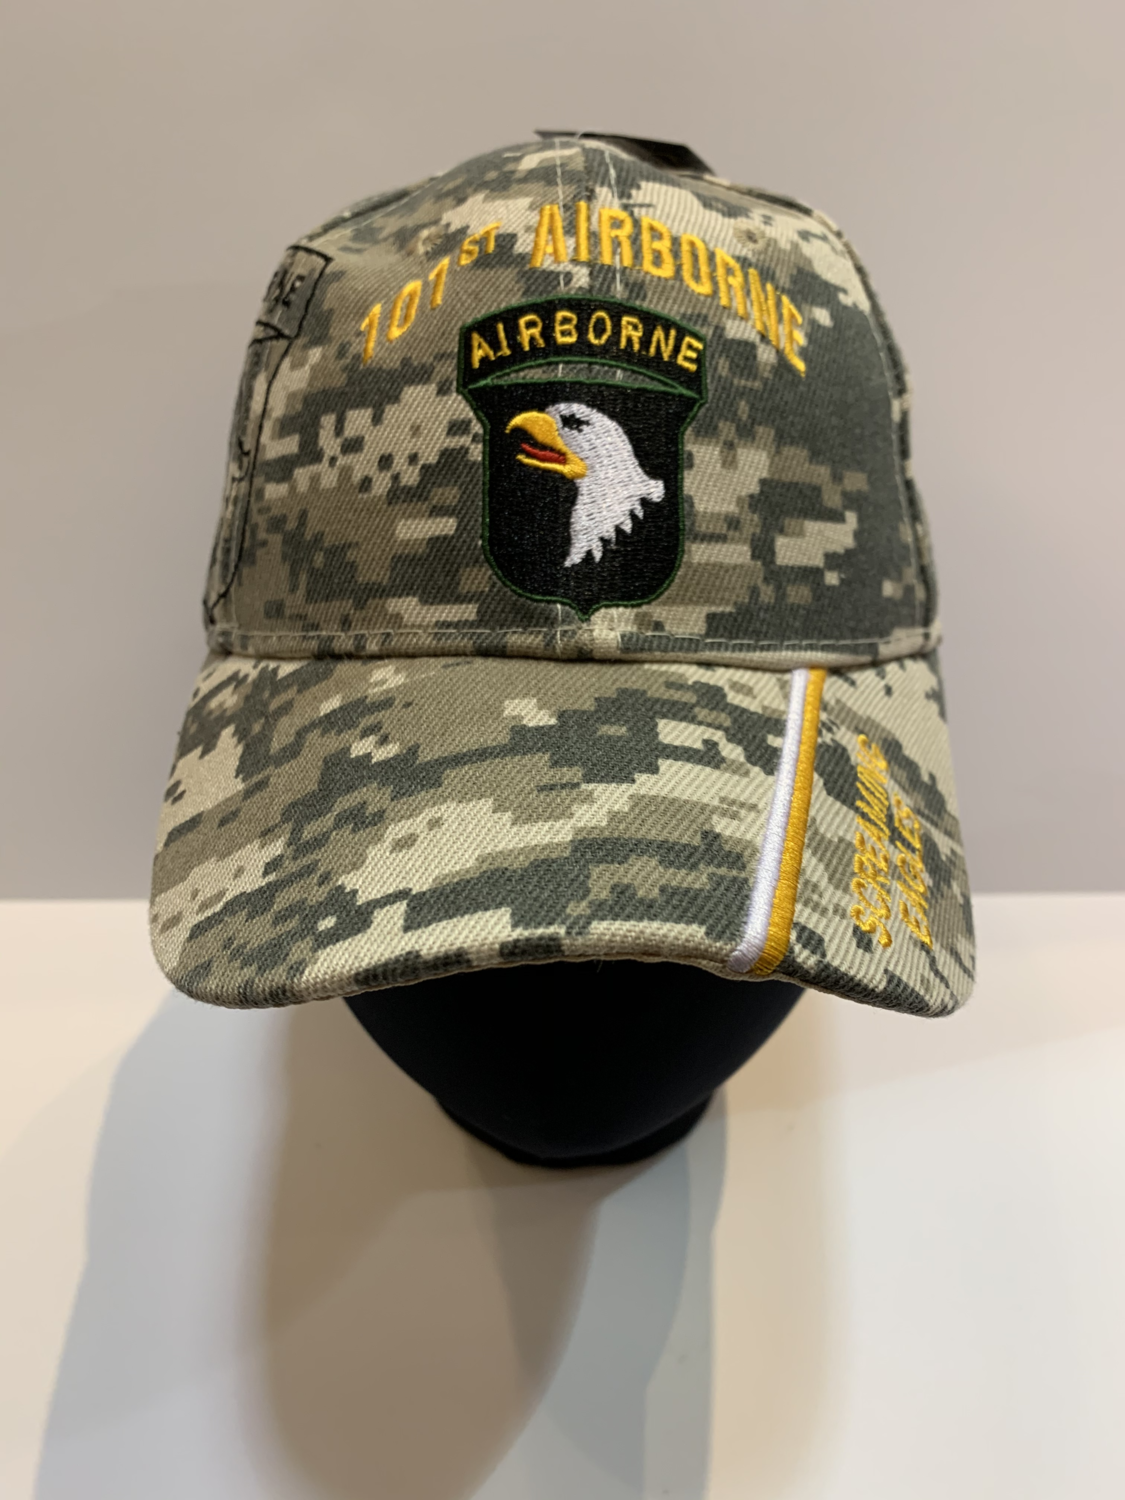 ARMY Hats 101st Airborne